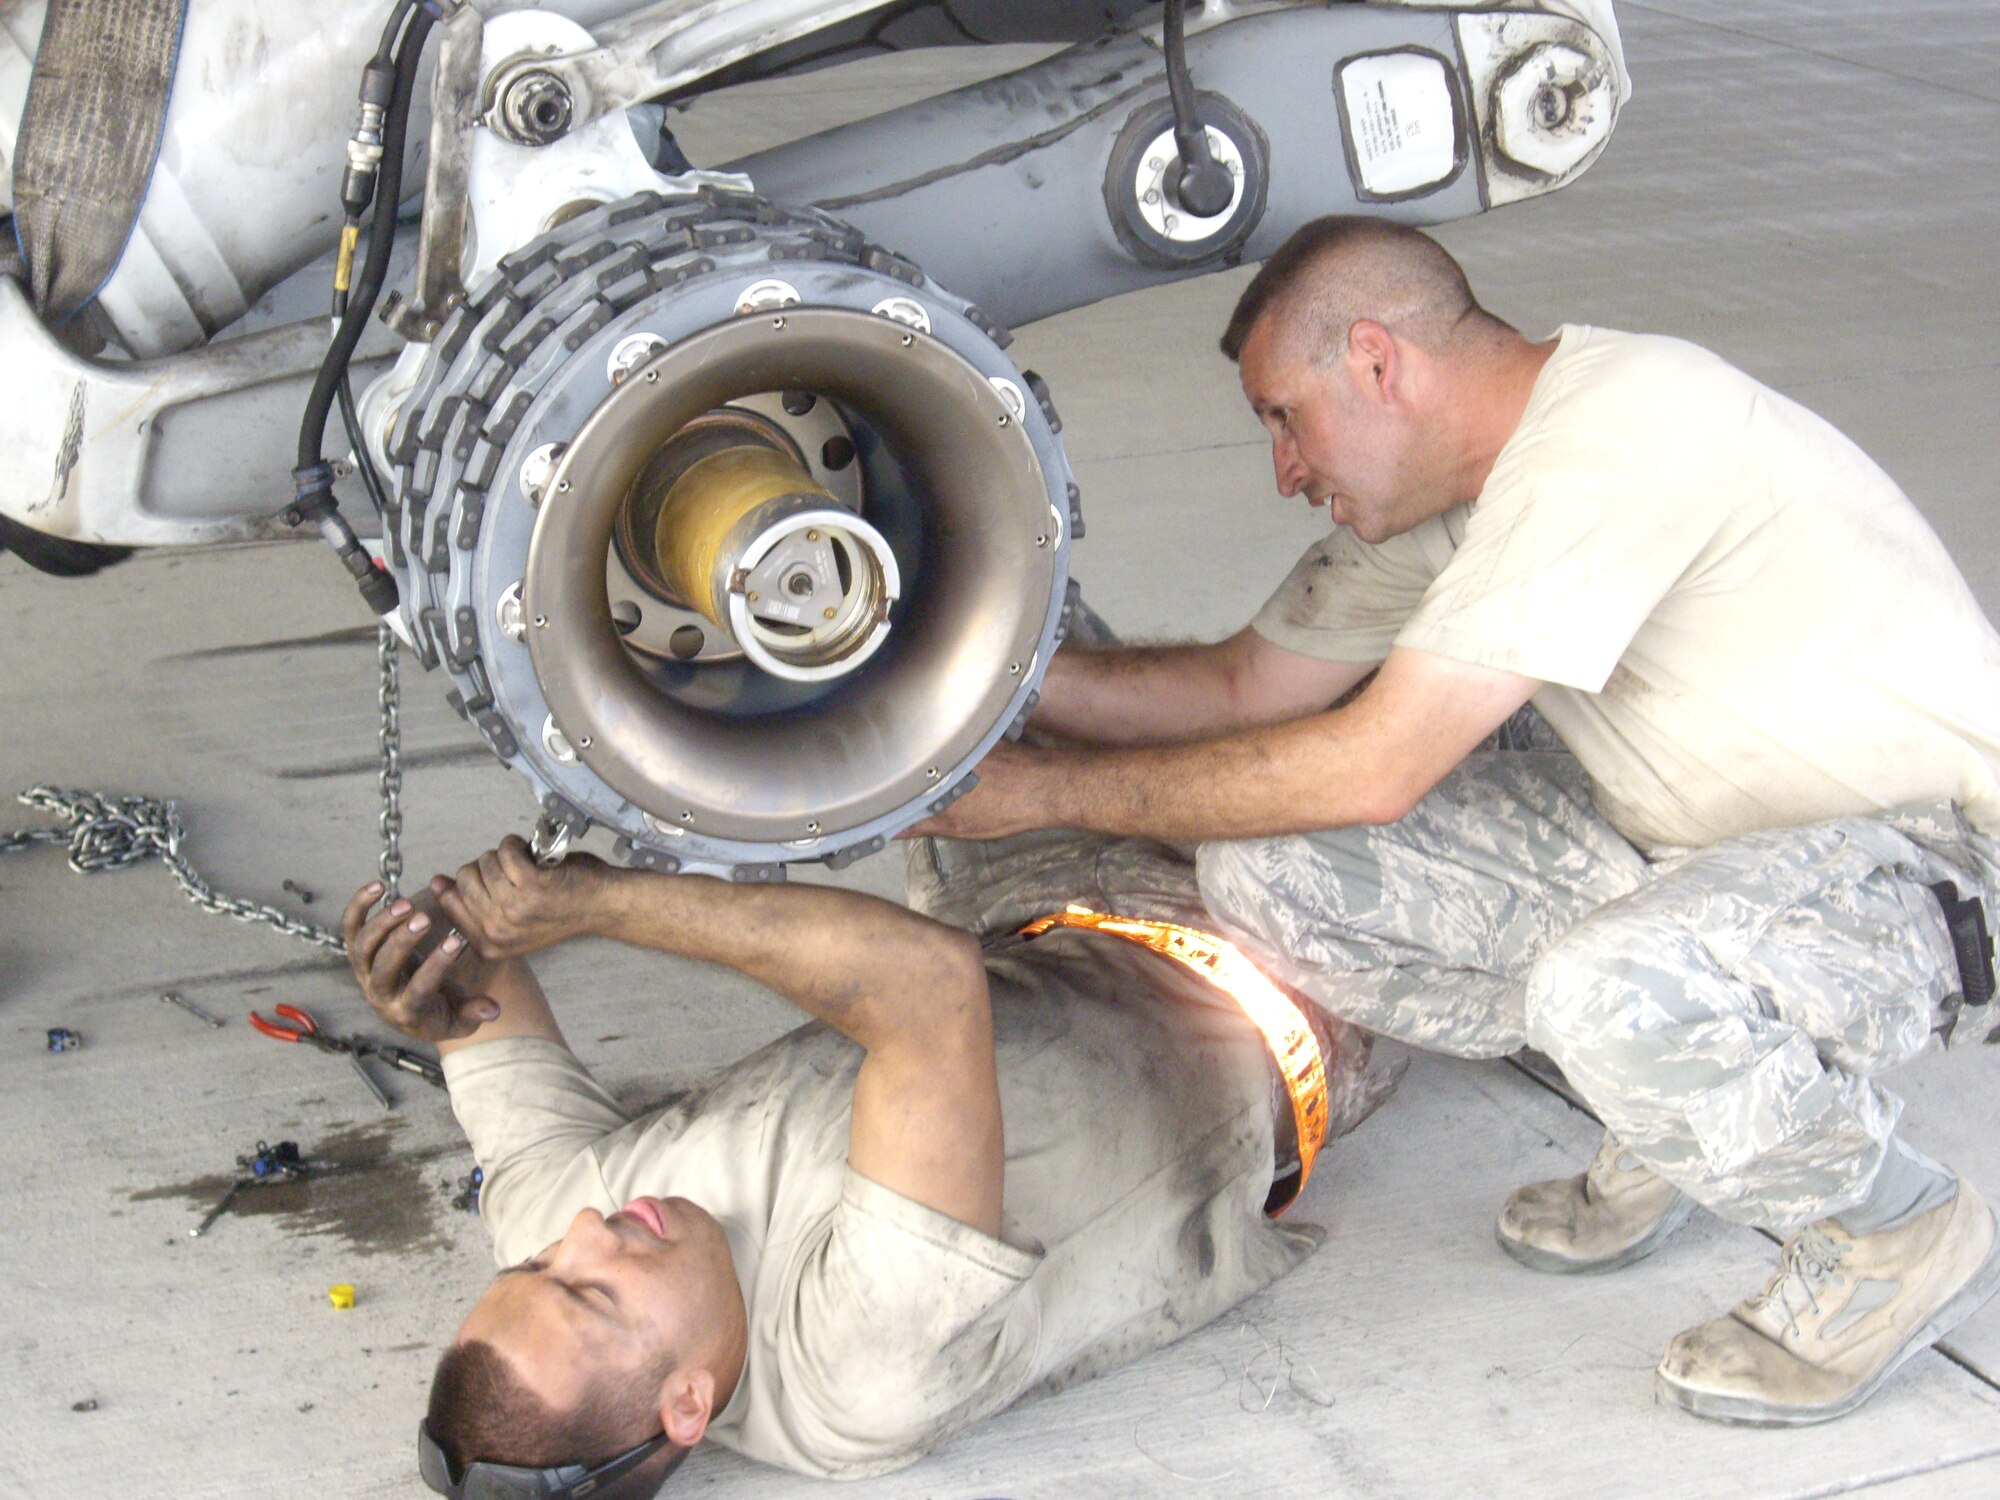 Staff Sgt. Alan Soriano (left) connects a brake temperature sensor harness cannon plug to the brake temperature sensor while Tech. Sgt. Gregory Bernett attaches hardware related to the brake assembly and harnesses Sept. 14, 2012. Soriano and Bernett are a part of a seven-man mission recovery team assigned to the 8th Expeditionary Air Mobility Squadron who forward deployed to Forward Operating Base Shank, Afghanistan, to recover a downed C-17 Globemaster III. The team, while under daily mortar attacks, replaced repair twelve tires, eight brakes and break temperature sensors on the immobile C-17 to get it flight ready. (U.S. Air Force courtesy photo)